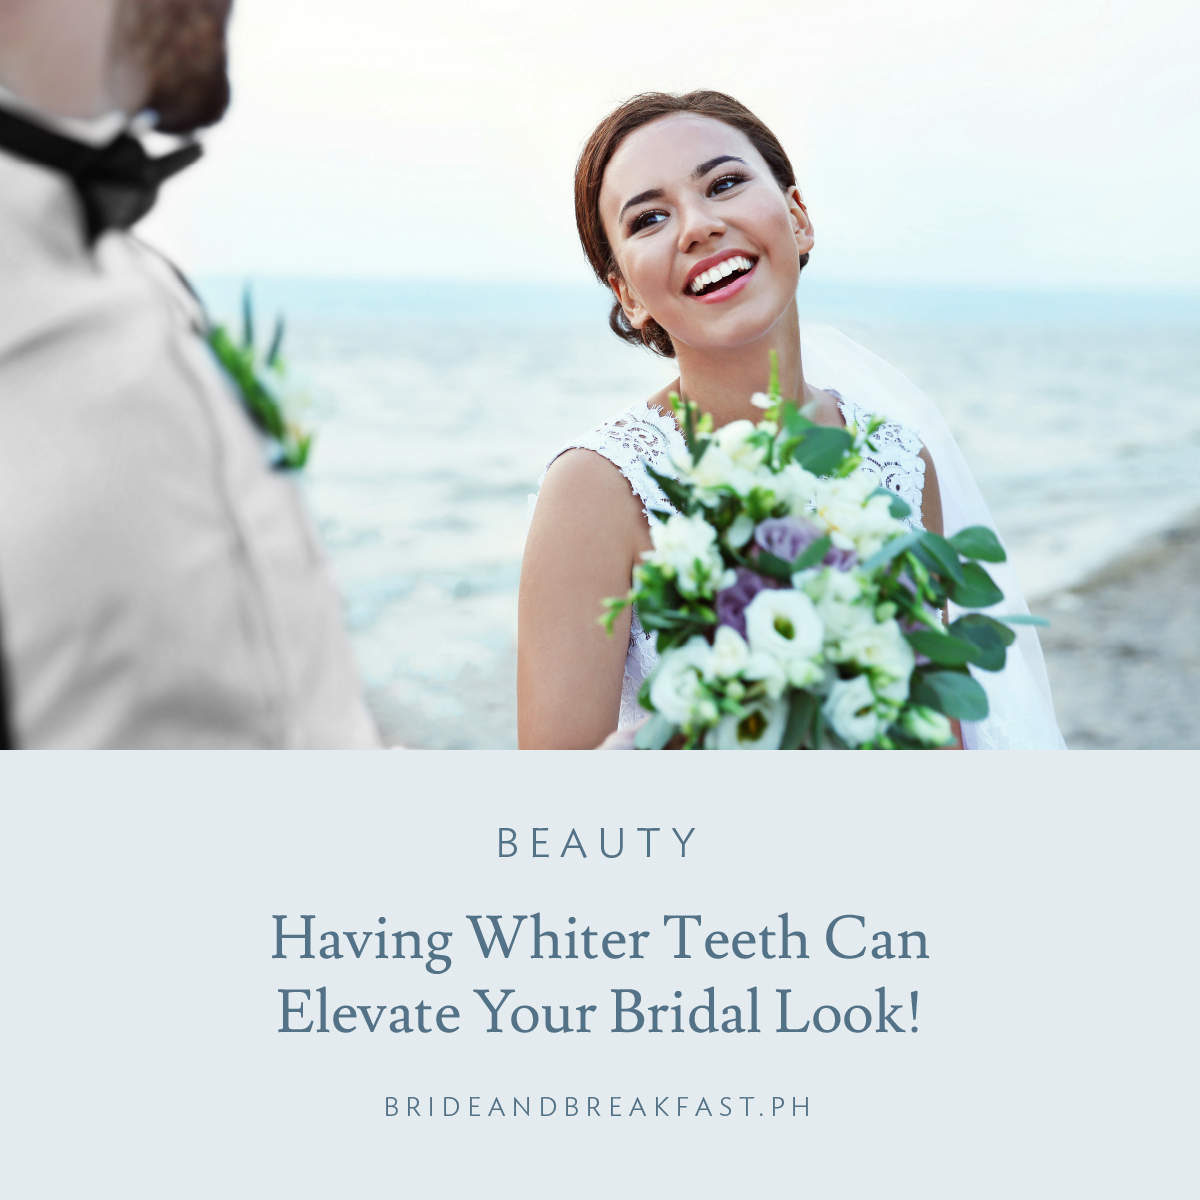 Having Whiter Teeth Can Elevate Your Bridal Look!